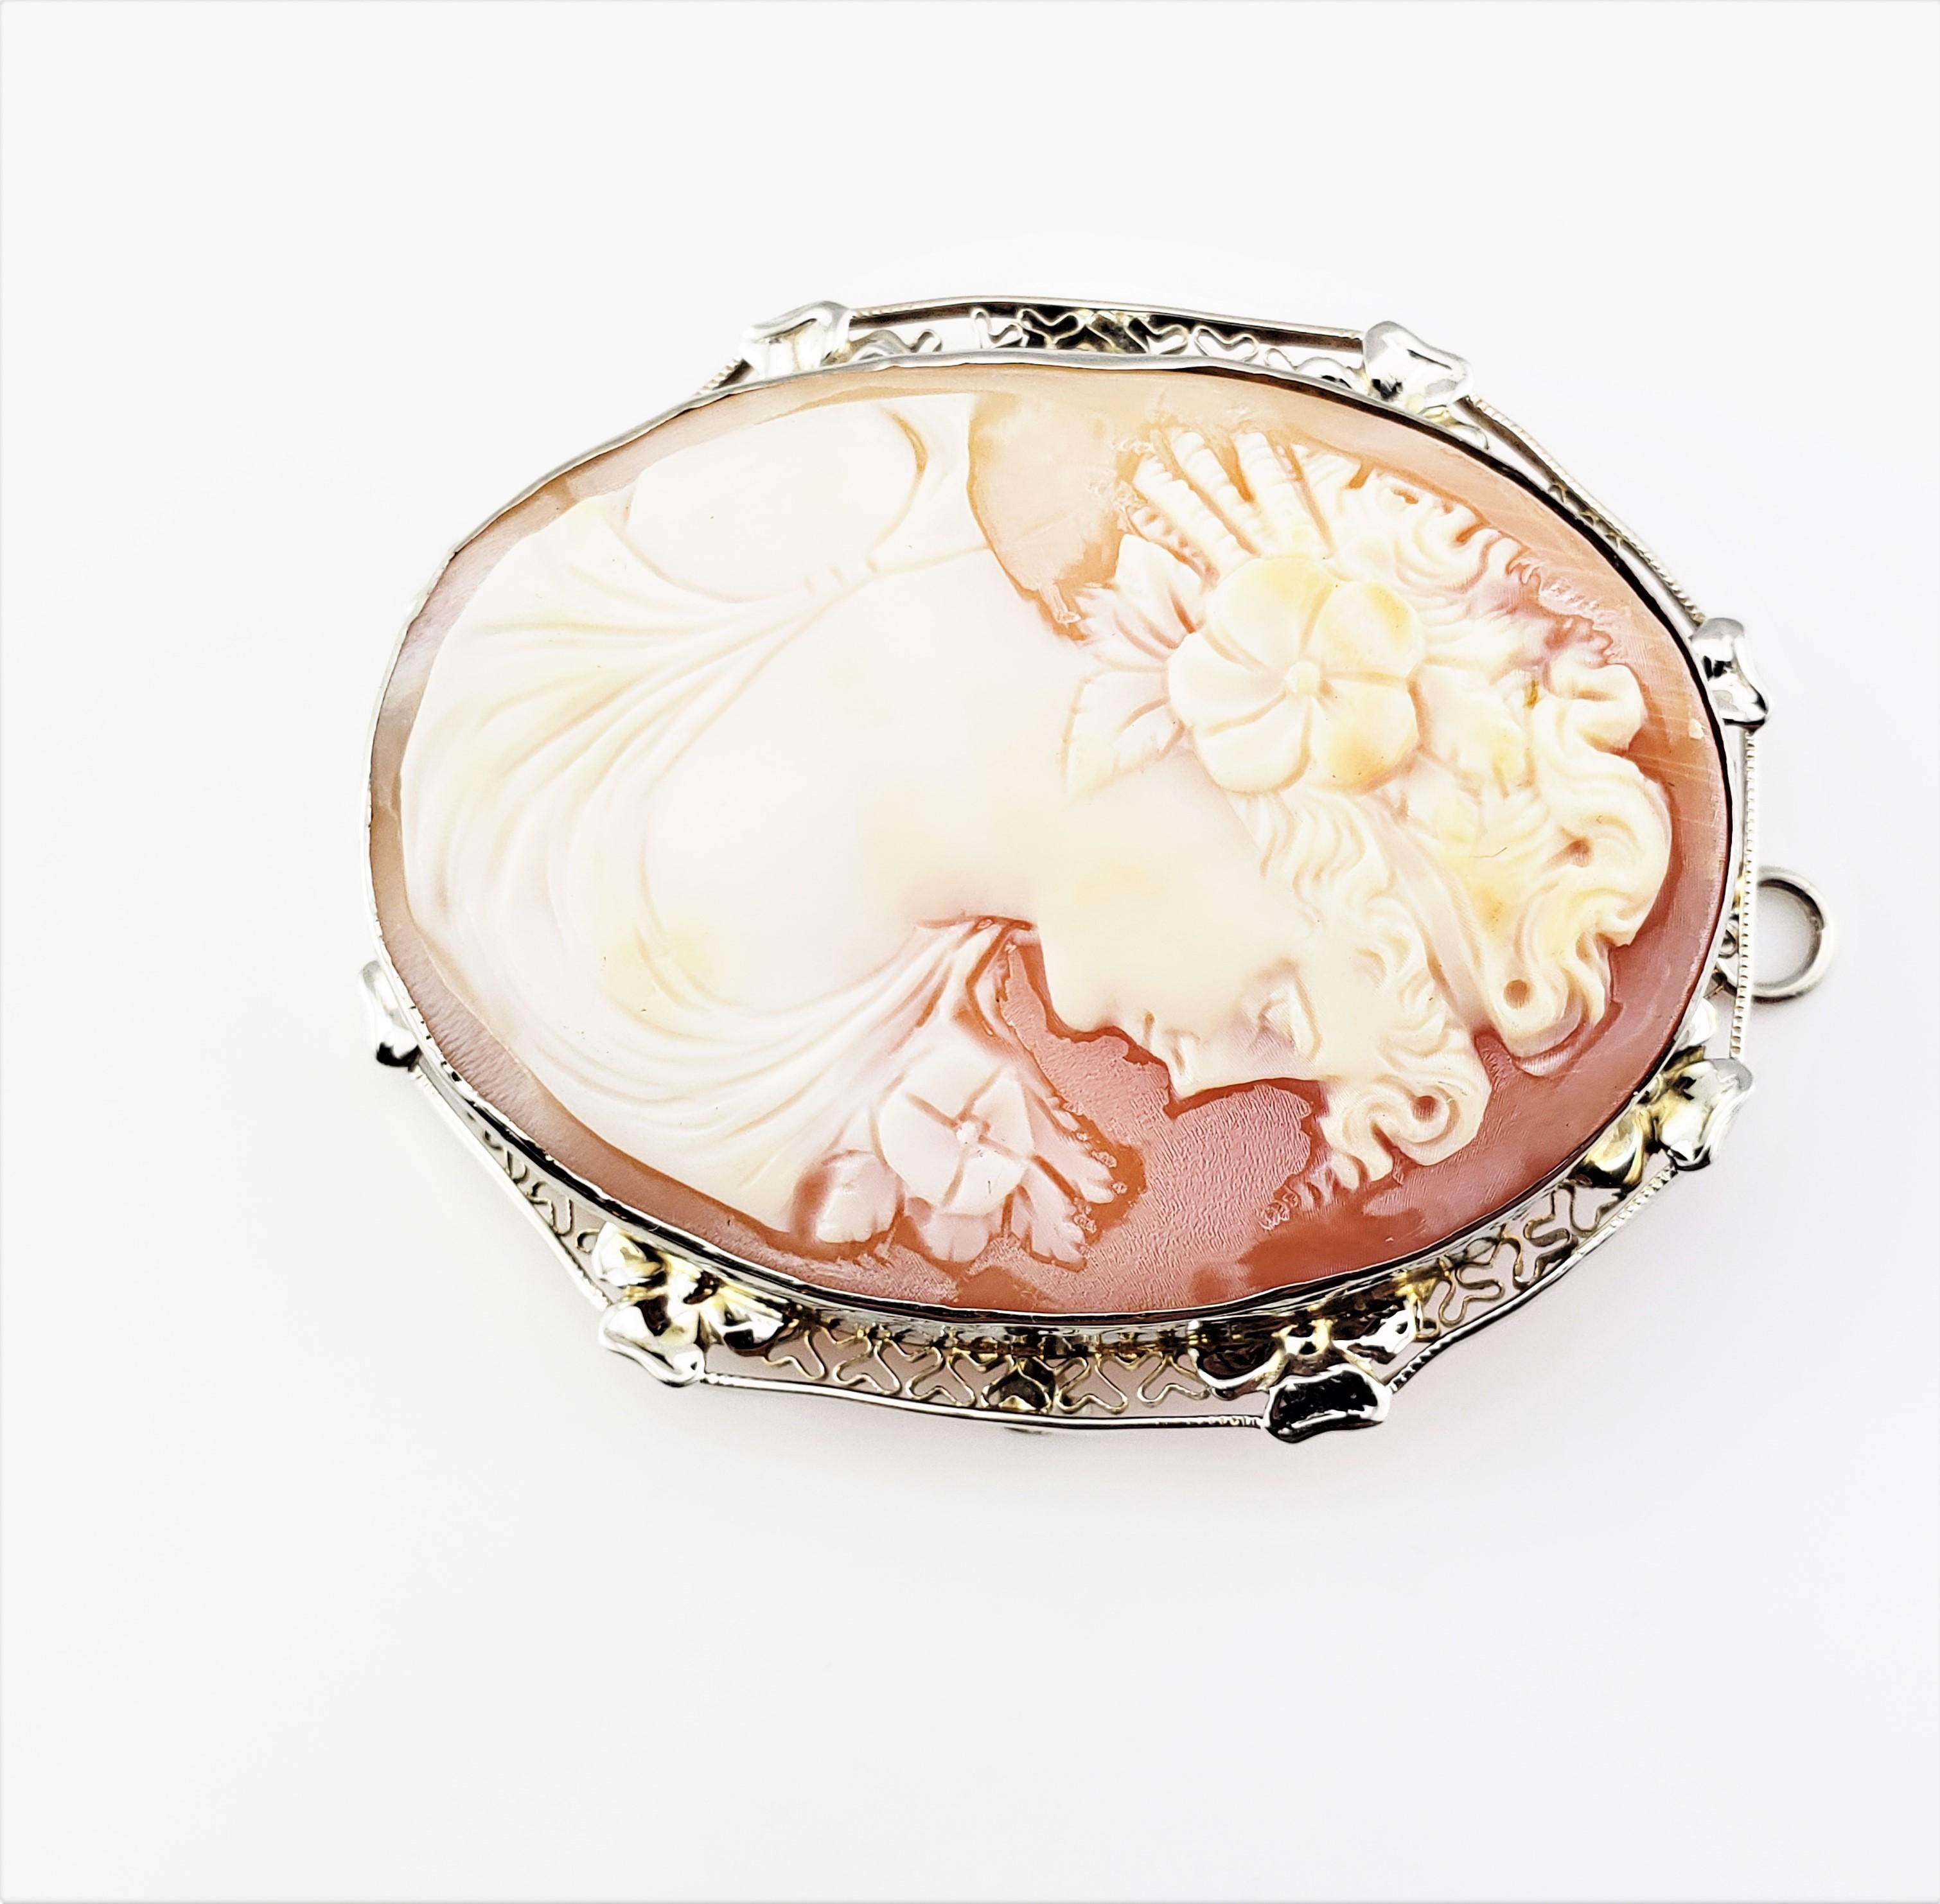 14 Karat Yellow and White Gold Cameo Brooch/Pendant-

This elegant cameo features a lovely lady in profile meticulously detailed in 14K white and yellow gold.  Can be worn as a brooch or a pendant.
*Chain not included

Size:  47 mm x  39 mm

Weight: